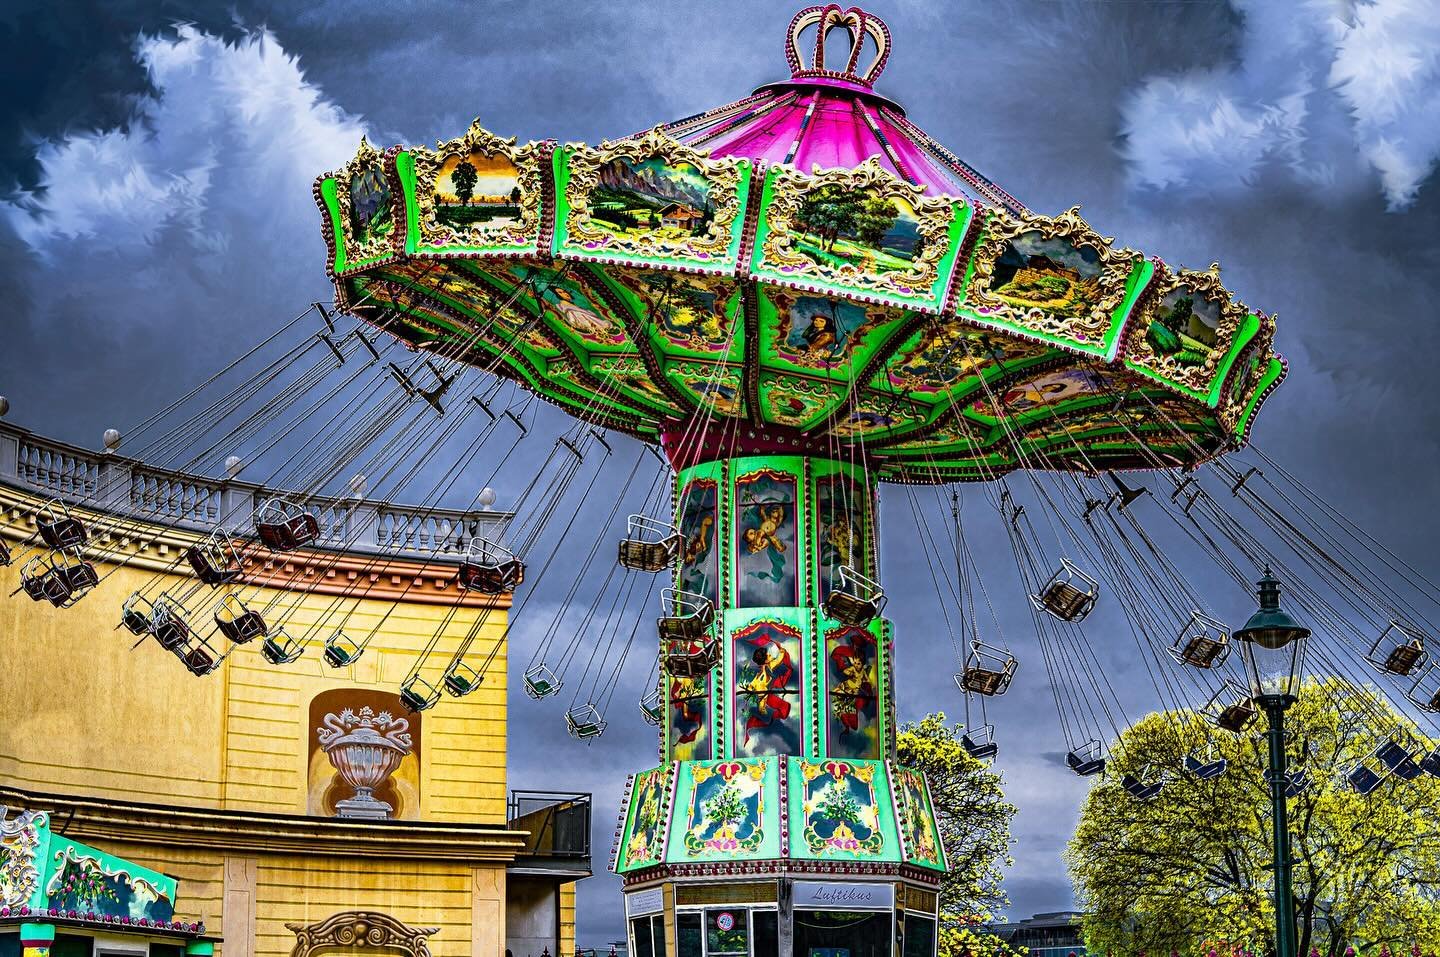 From our &quot;Colorscapes&quot; Exhibit gallery, &quot;Scary Go Round&quot; by Allison Lund. Congratulations to the winners and all the photographers whose work we&rsquo;re honored to include in this show!

#fineartphotography #color #colorful #artp